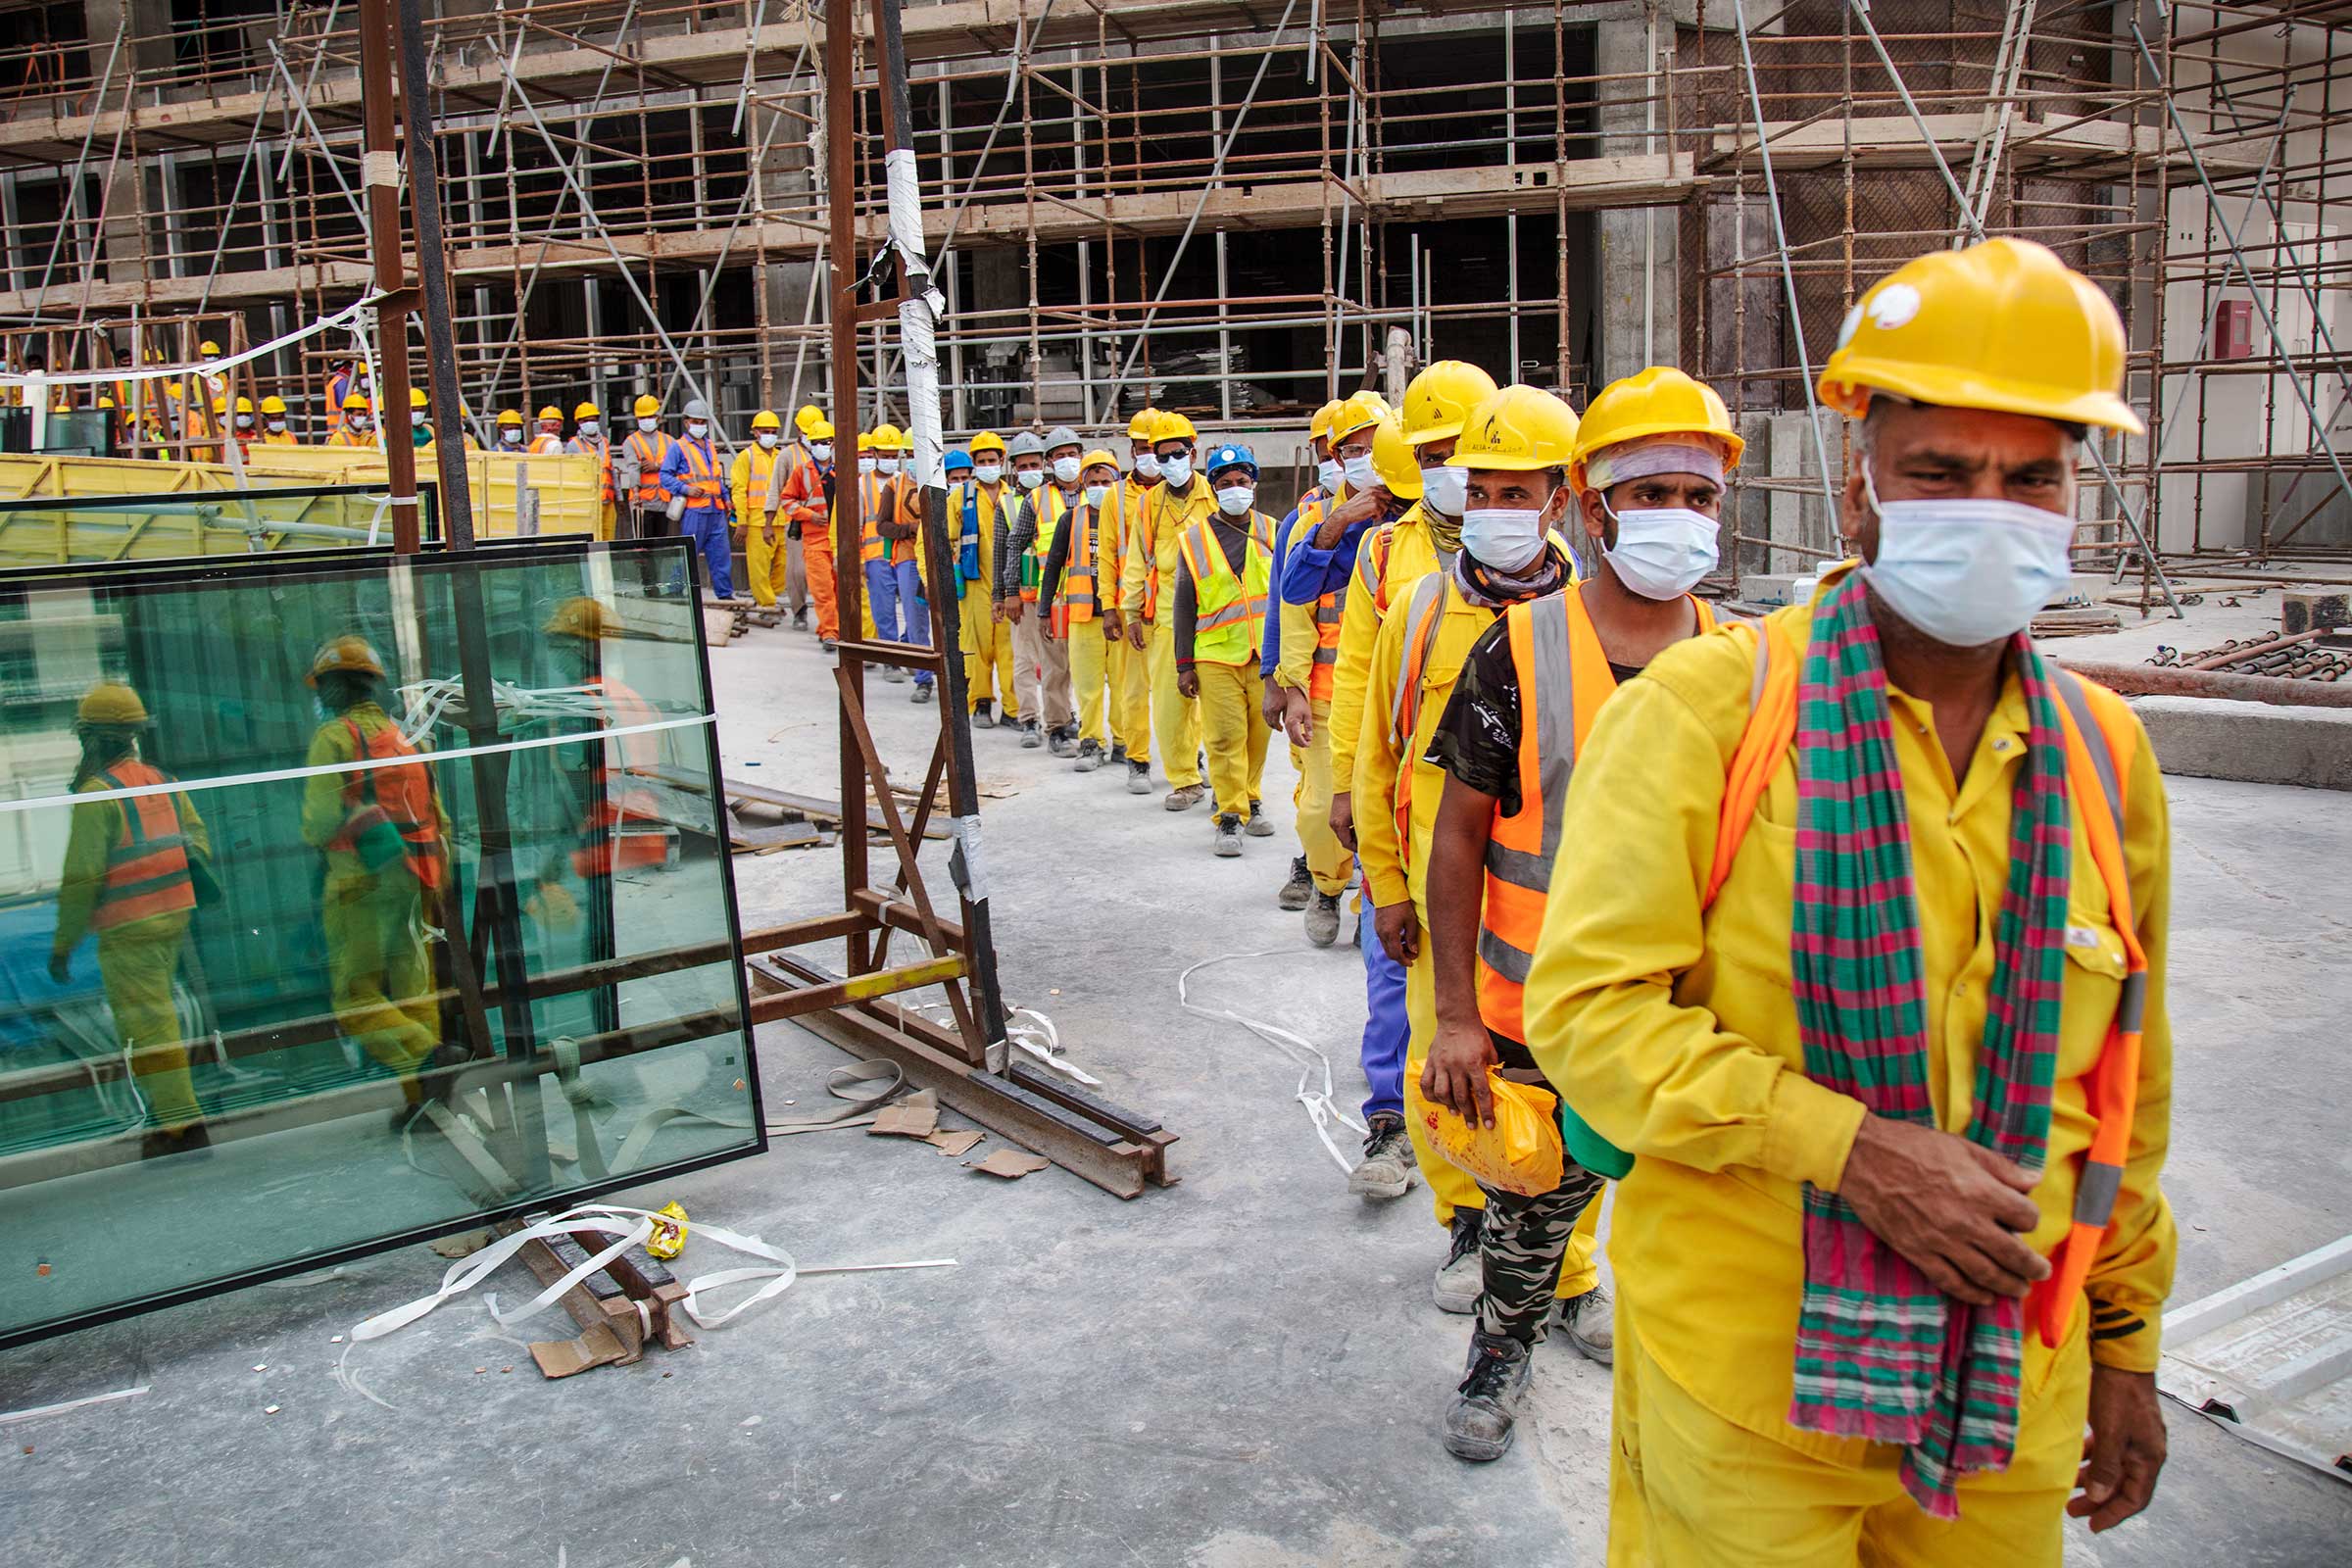 Workers at a Doha construction site lining up to get into buses to head to their sleeping quarters to rest during the mid-day heat, until the afternoon work started up again. (Ed Kashi—VII for TIME)